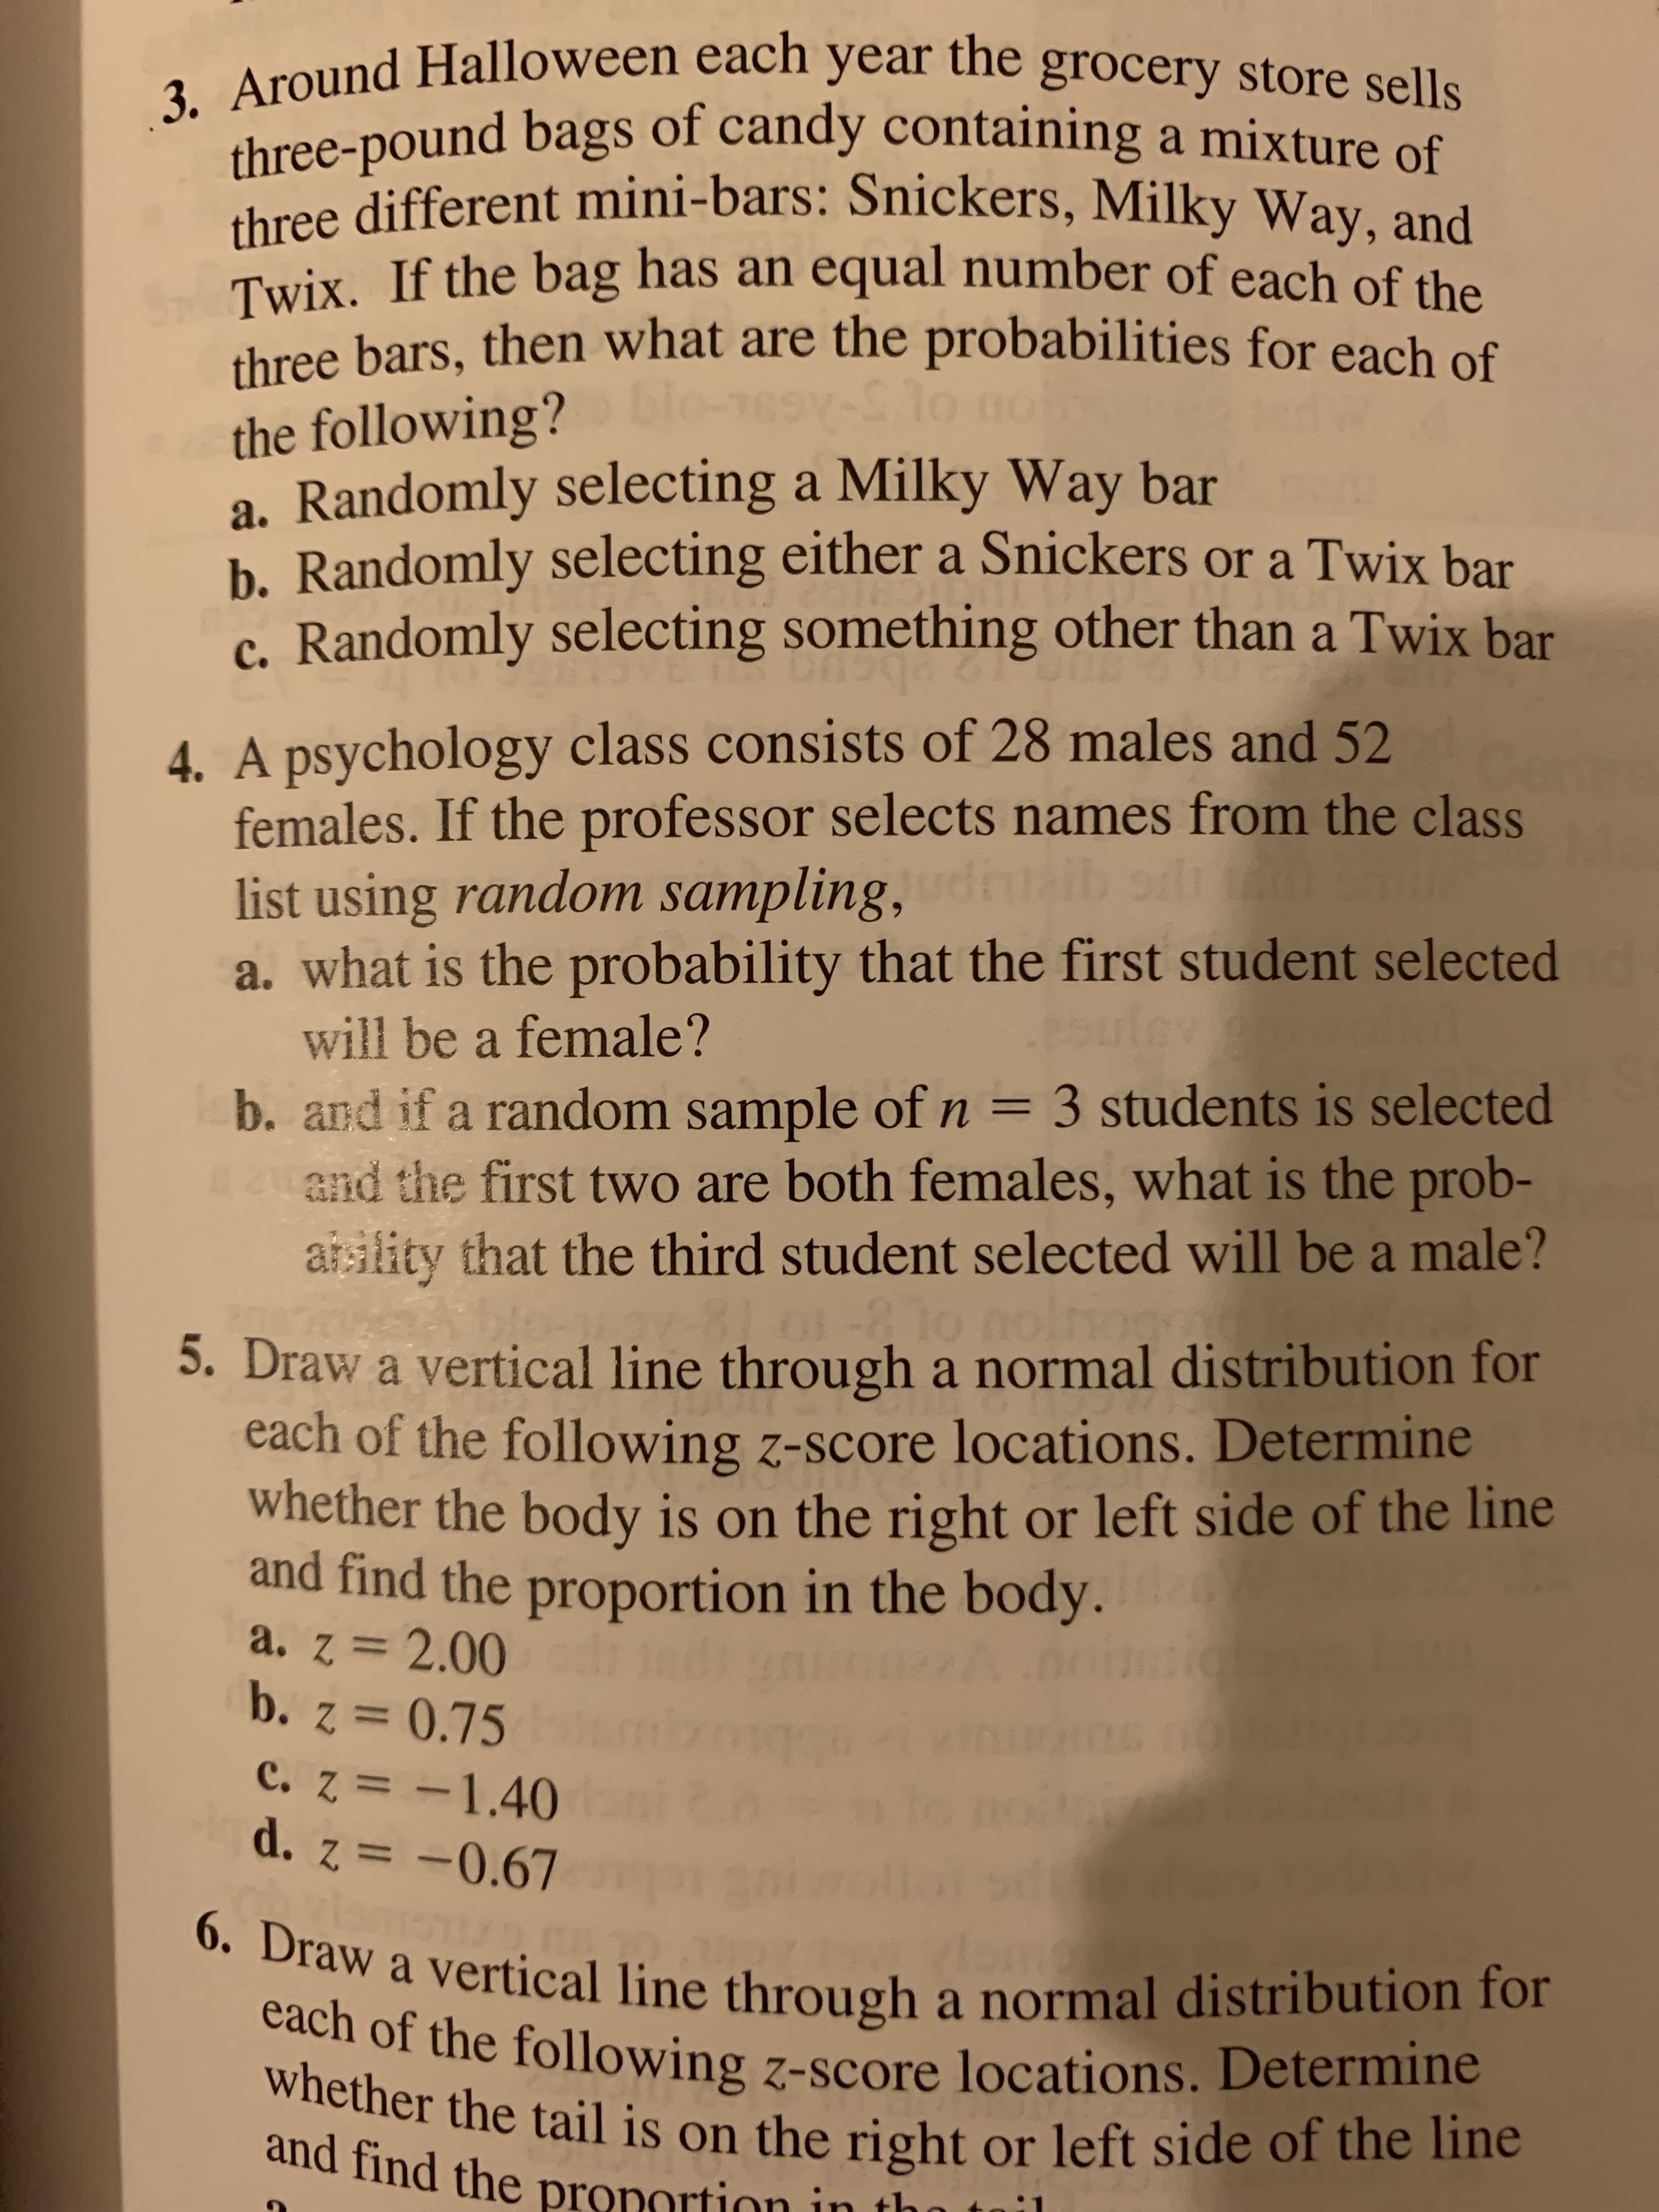 4. A psychology class čConsists of 28 males and 52
females. If the professor selects names from the class
list using random sampling, daib
a. what is the probability that the first student selected
will be a female?
b. and if a random sample of n = 3 students is selected
and the first two are both females, what is the prob-
aiility that the third student selected will be a male?
